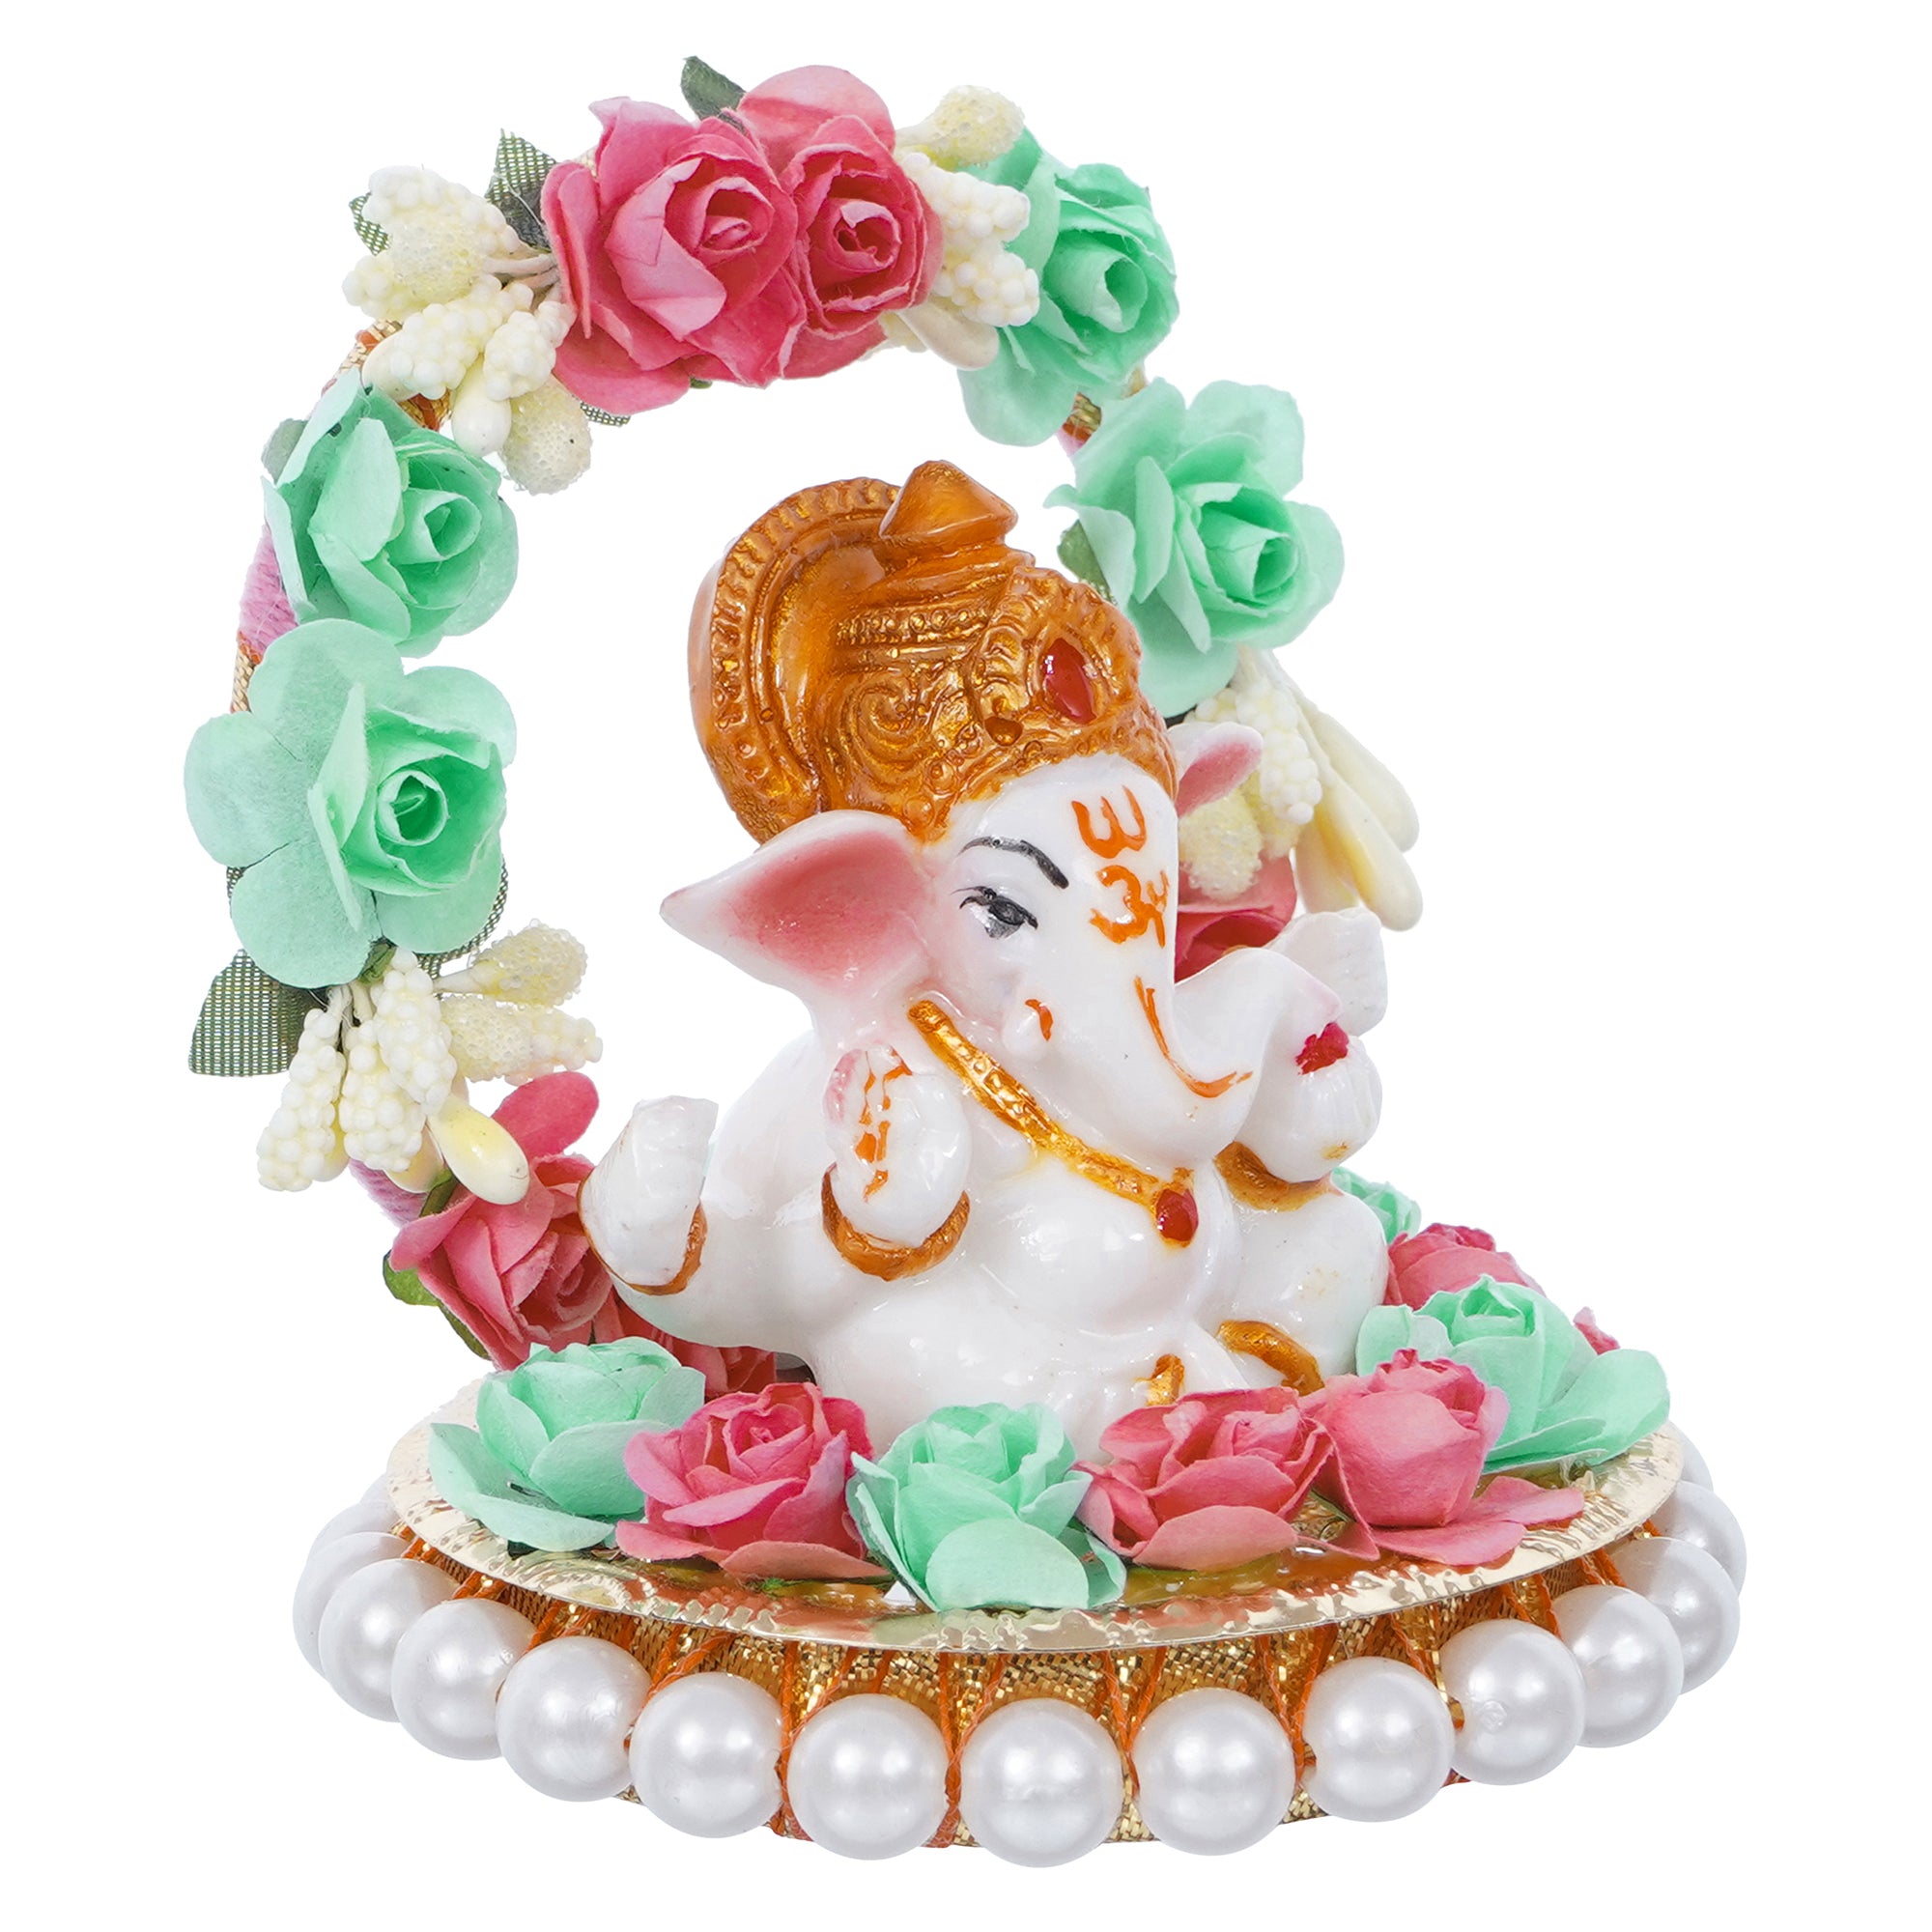 Lord Ganesha Idol On Decorative Handicrafted Plate With Throne Of Pink And Green Flowers 4